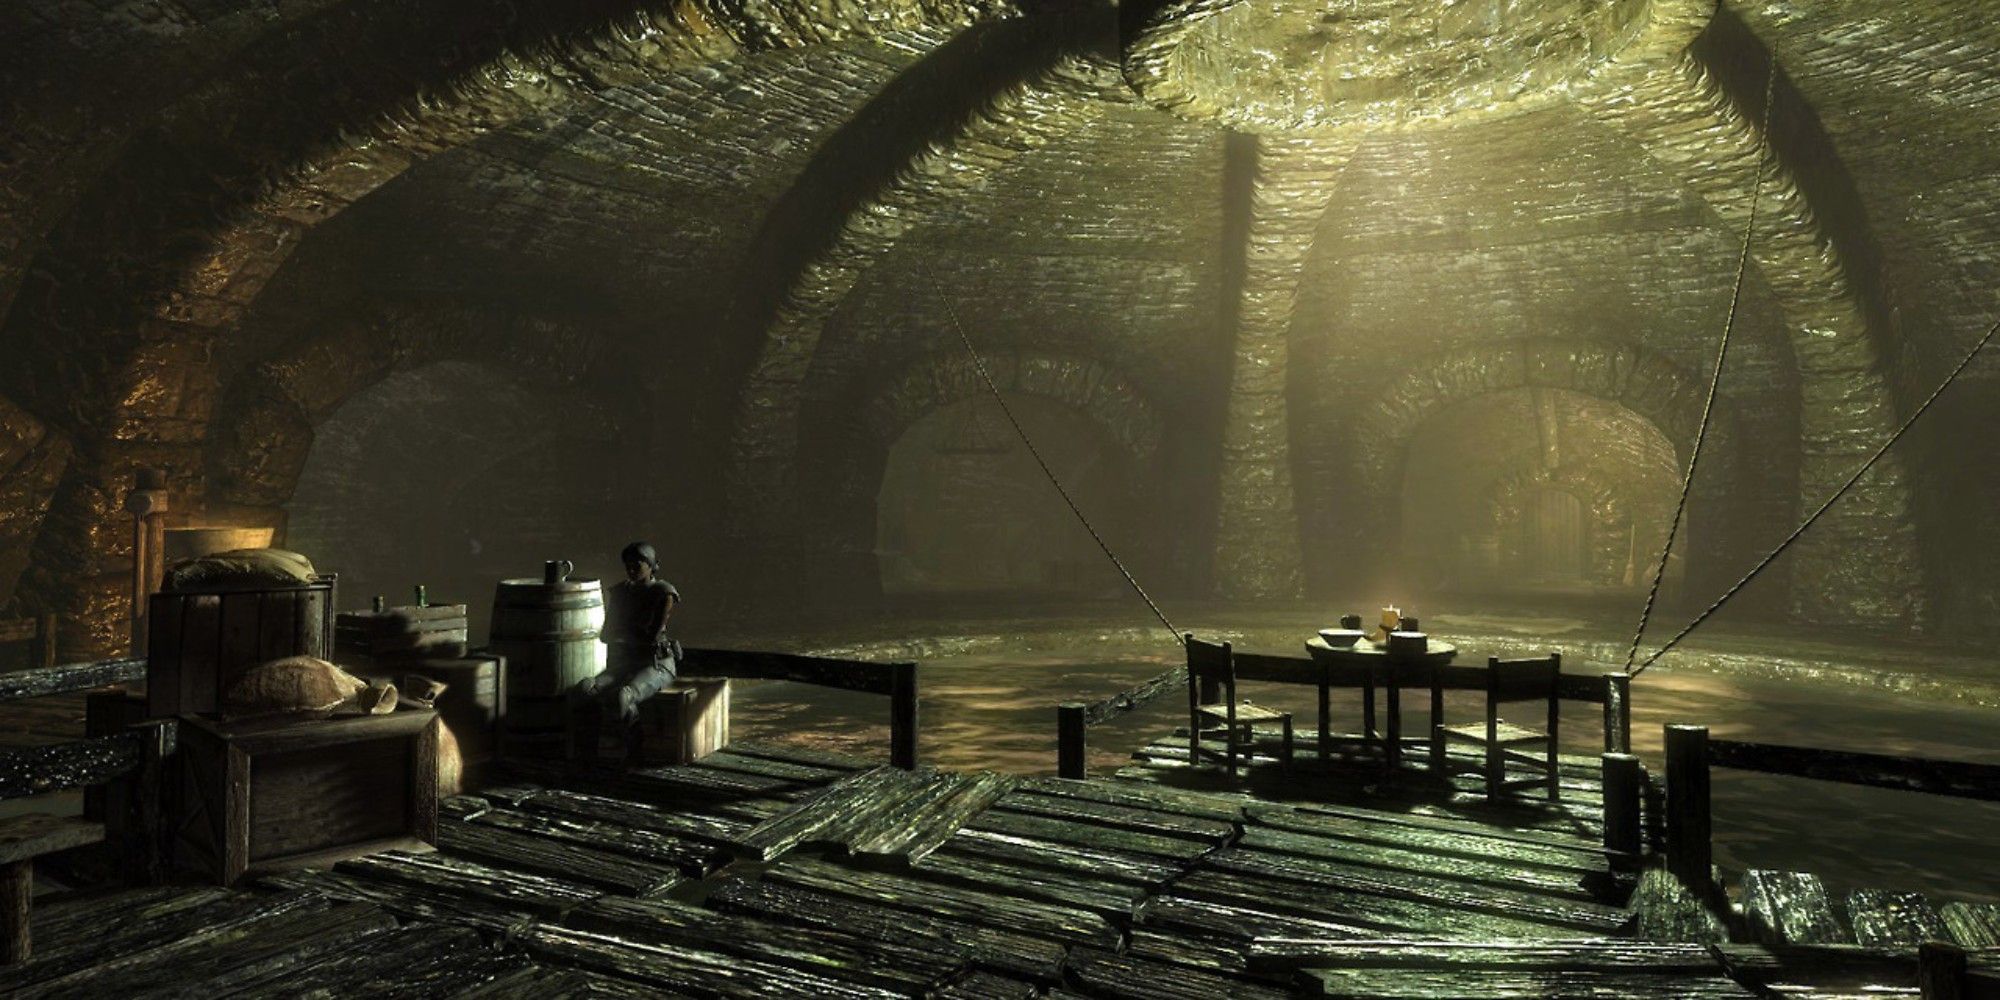 A picture of a small tavern built into the sewer system of an old city at a stone cistern.